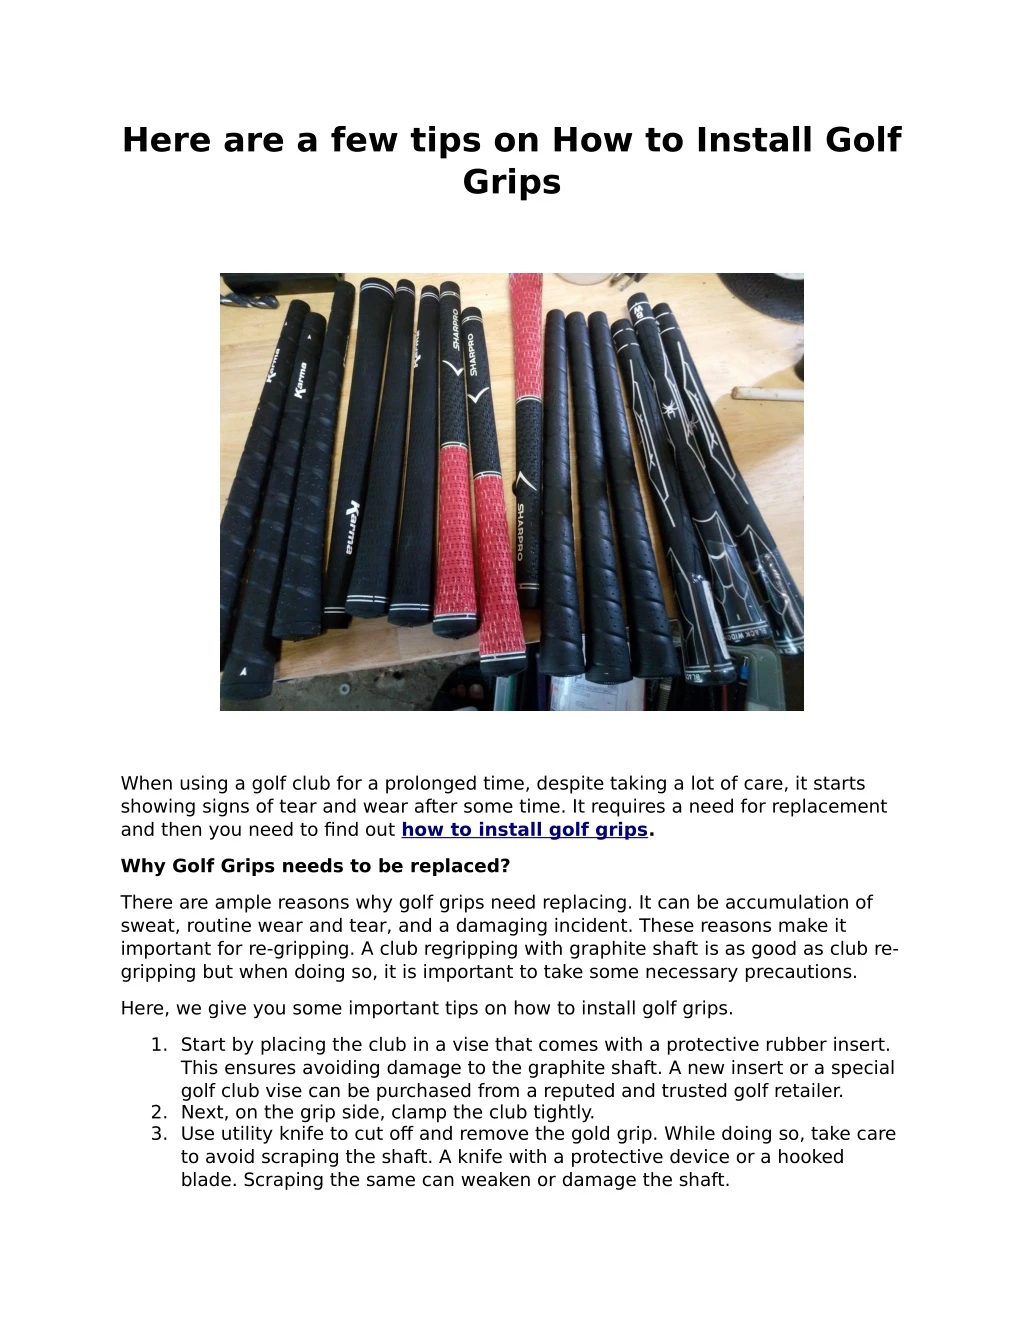 here are a few tips on how to install golf grips